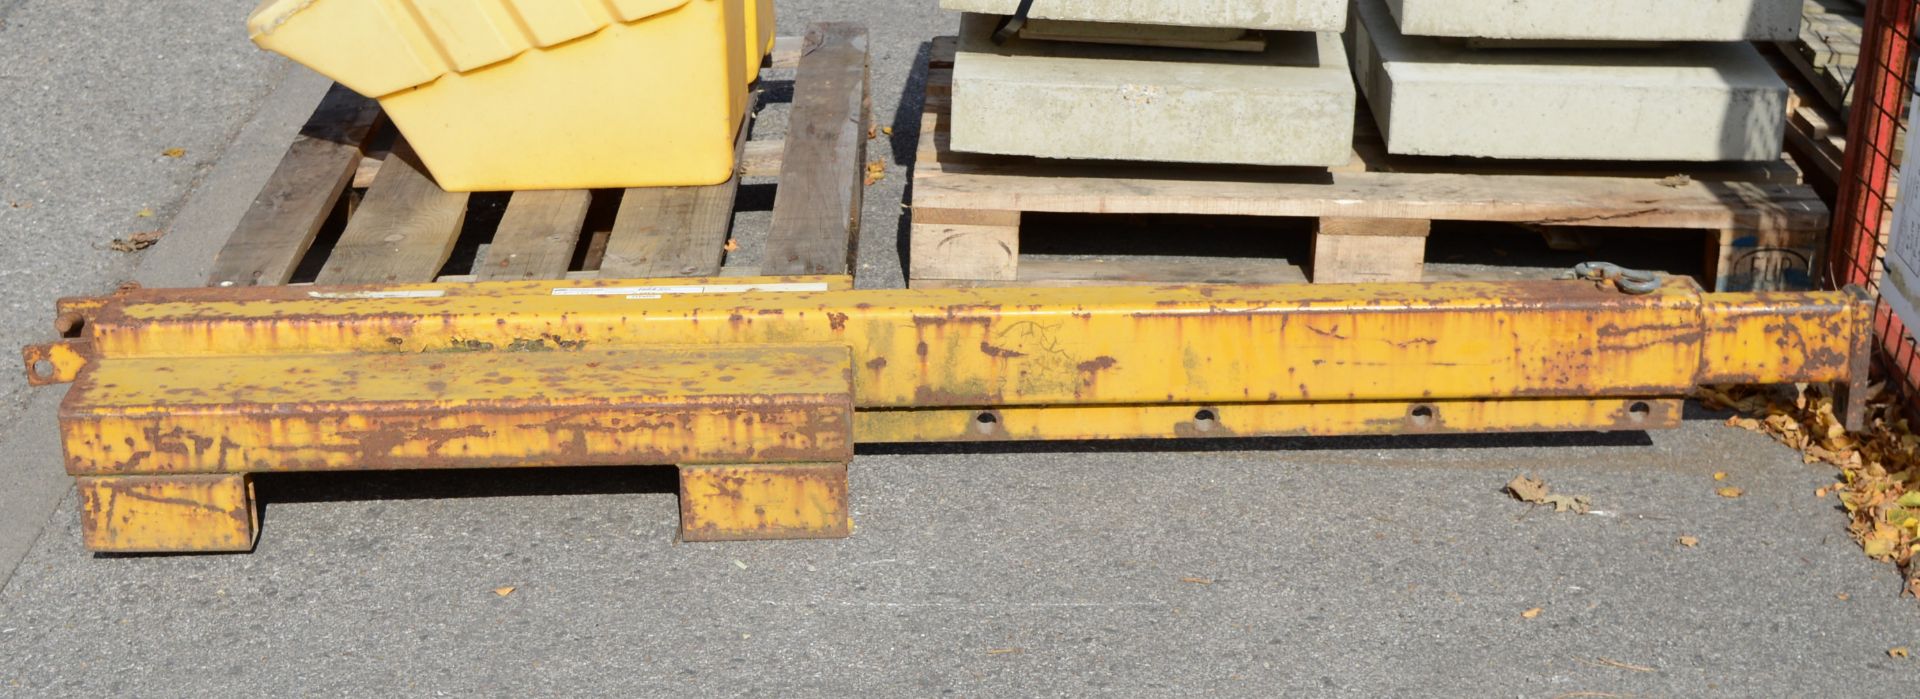 Forklift Jib Arm Yellow. - Image 2 of 2